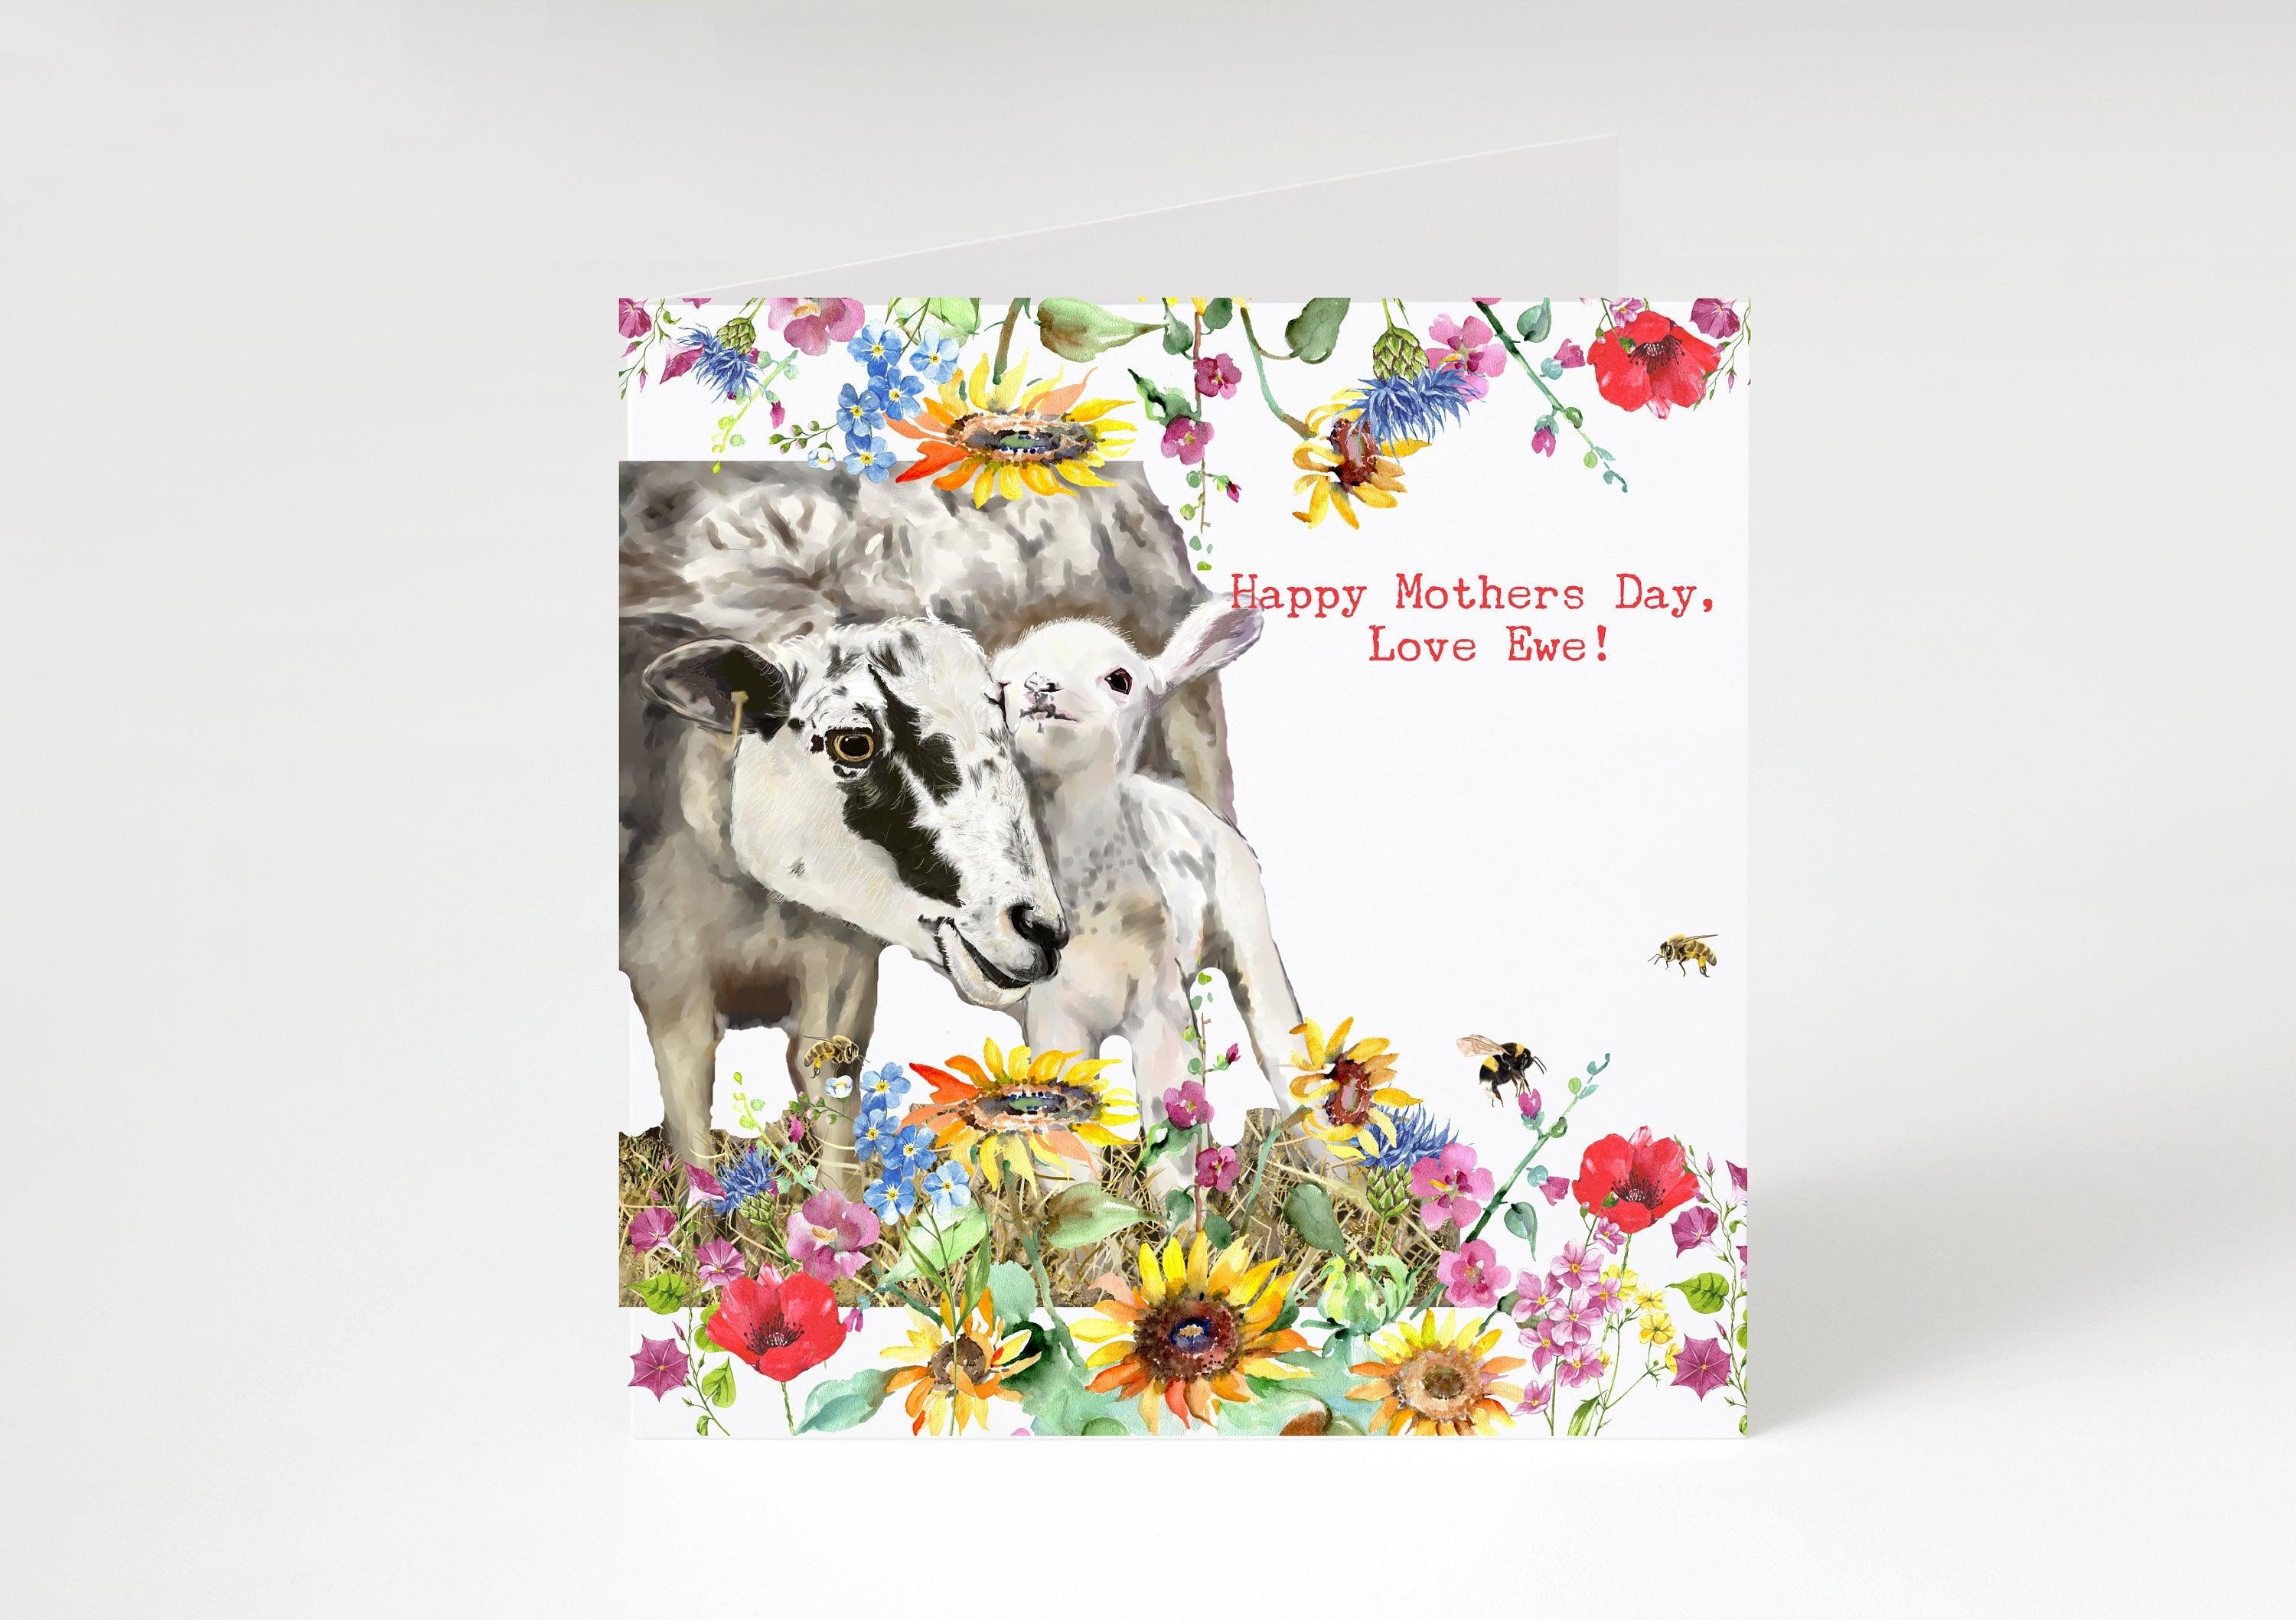 MOTHERS DAY CARD- Happy Mother's Day I Love Ewe-Pretty country themed sheep and lambs design  -Mother's Day Cards-